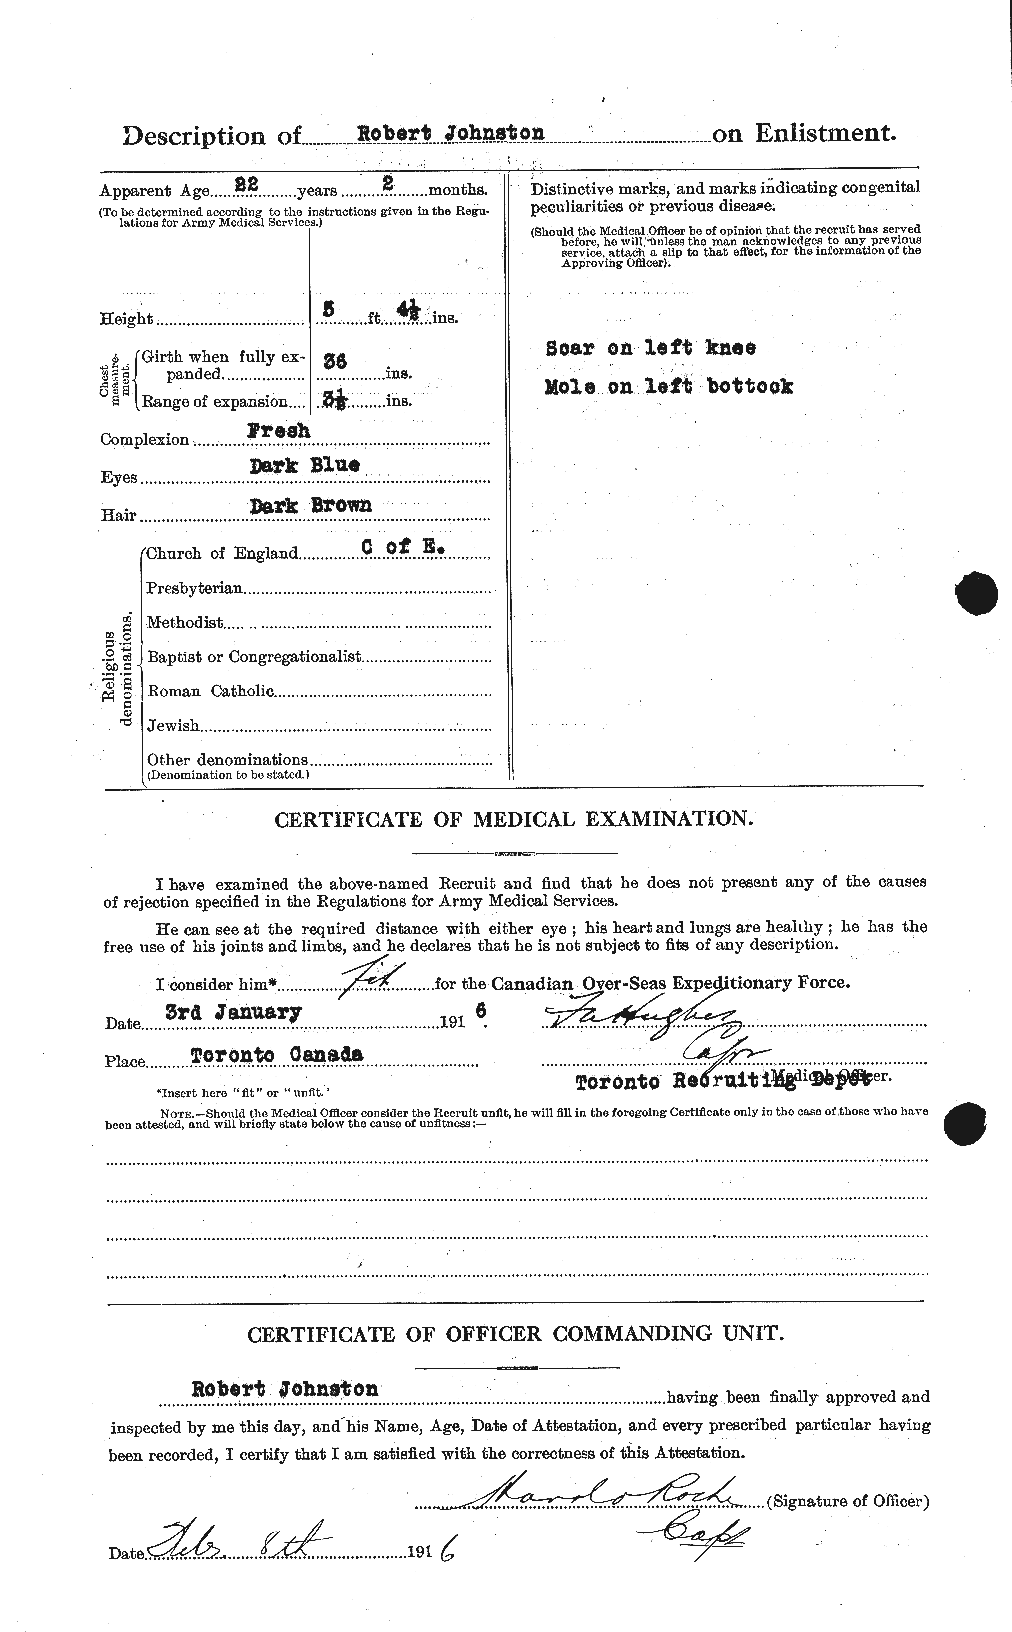 Personnel Records of the First World War - CEF 426998b